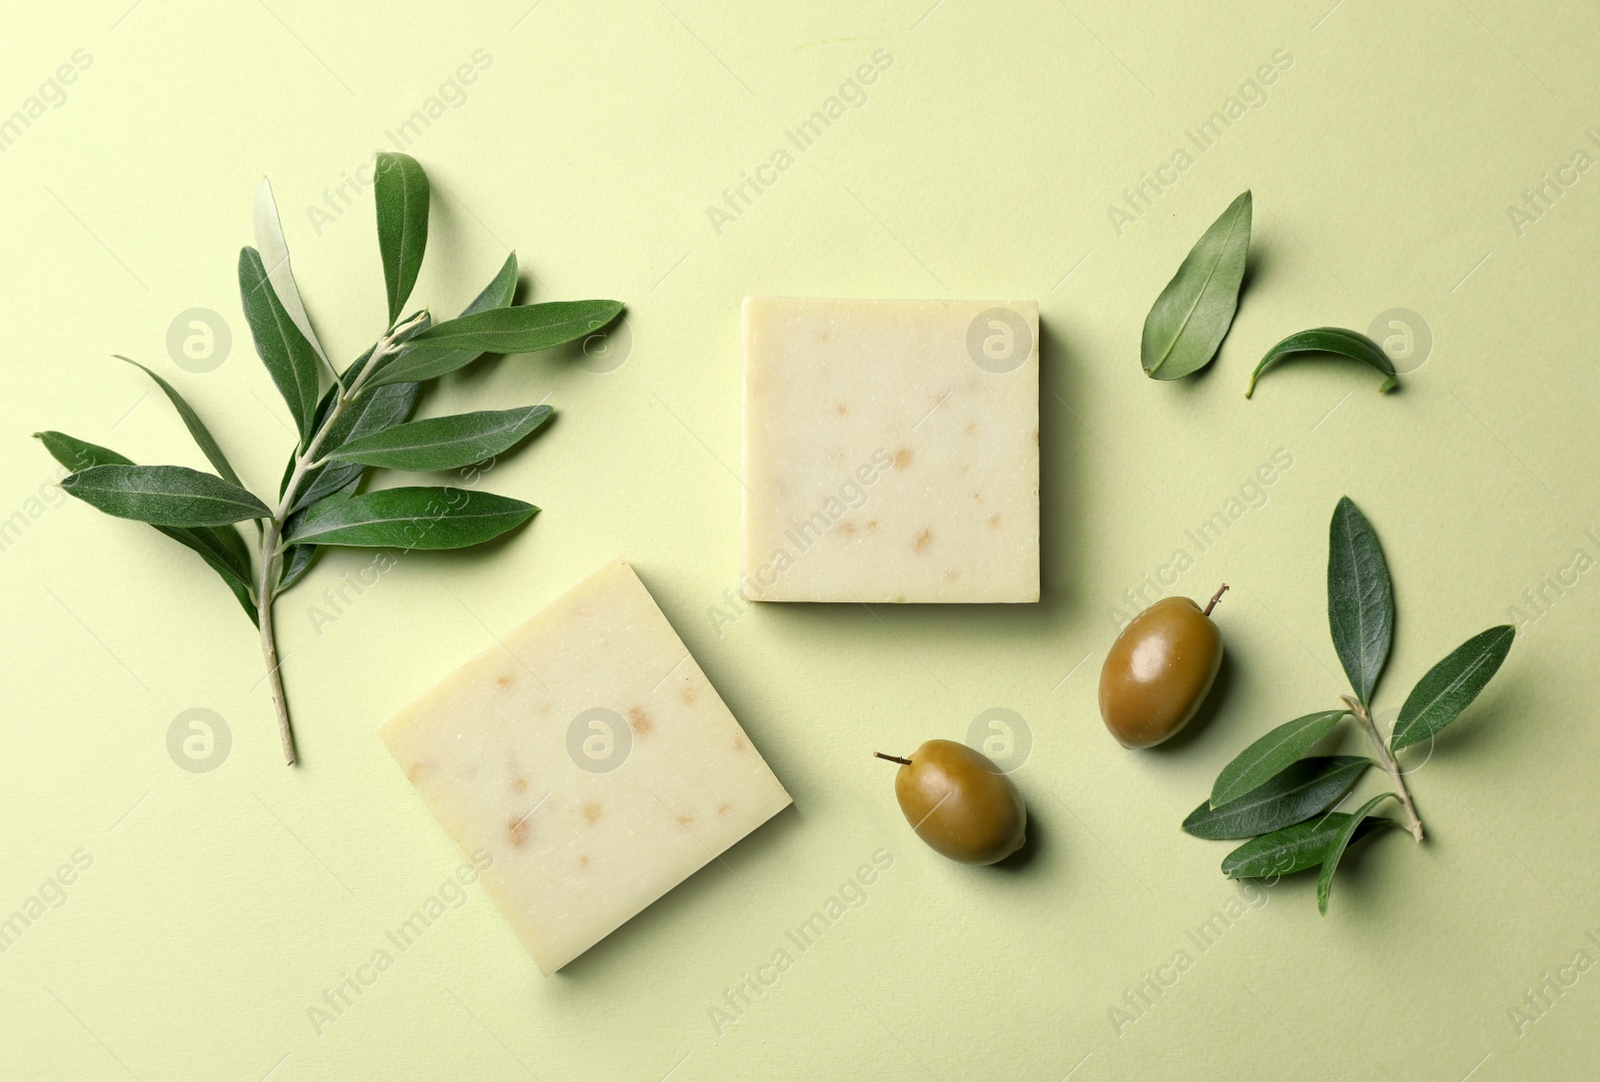 Photo of Handmade soap bars and leaves with olives on color background, top view